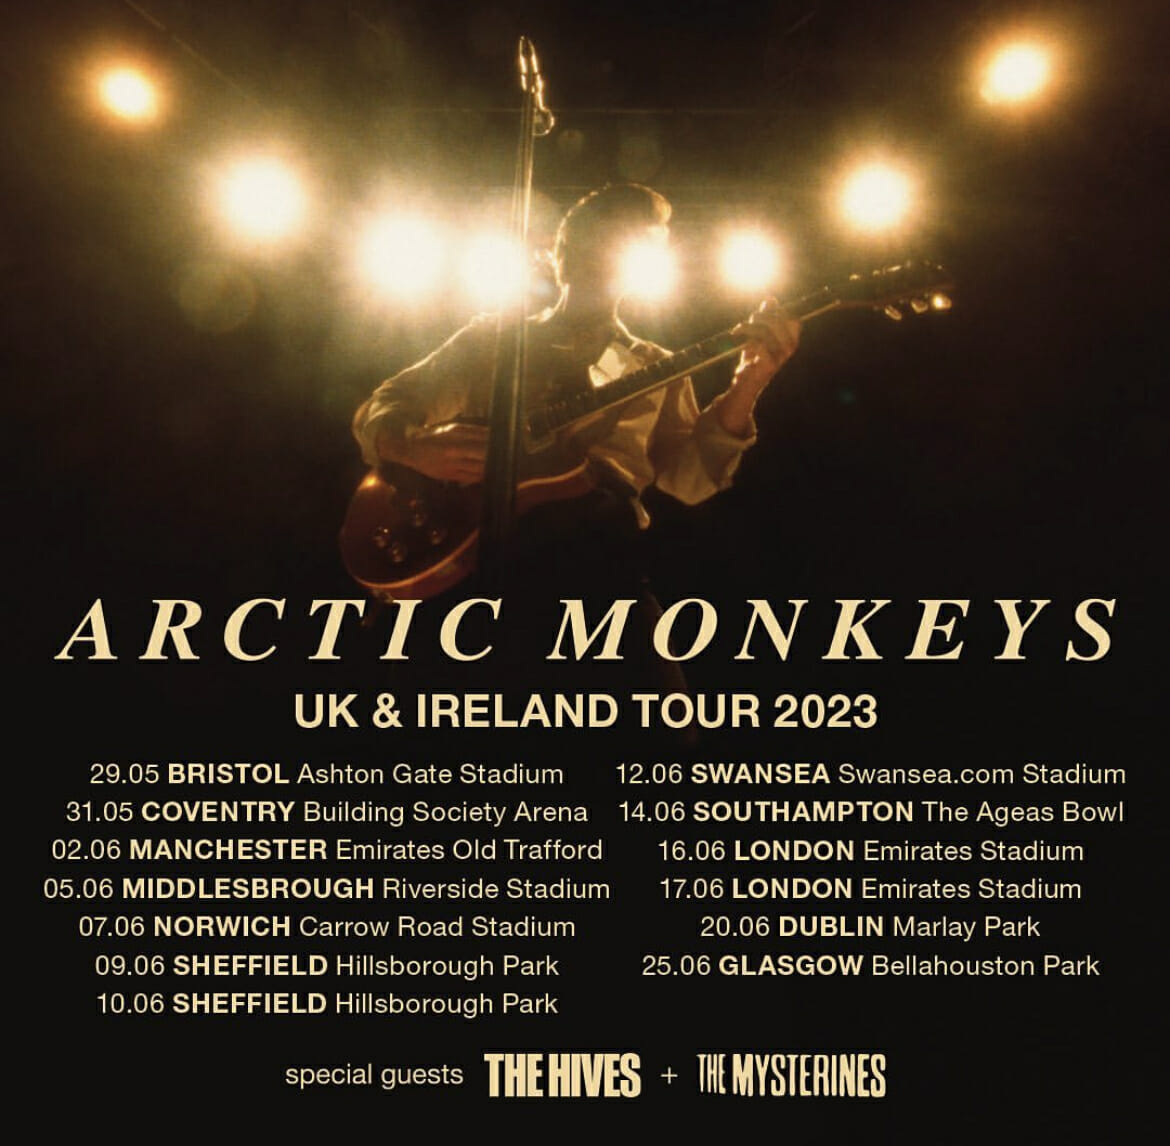 Arctic Monkeys Announce 2023 U.K. and Ireland Dates with The Hives and